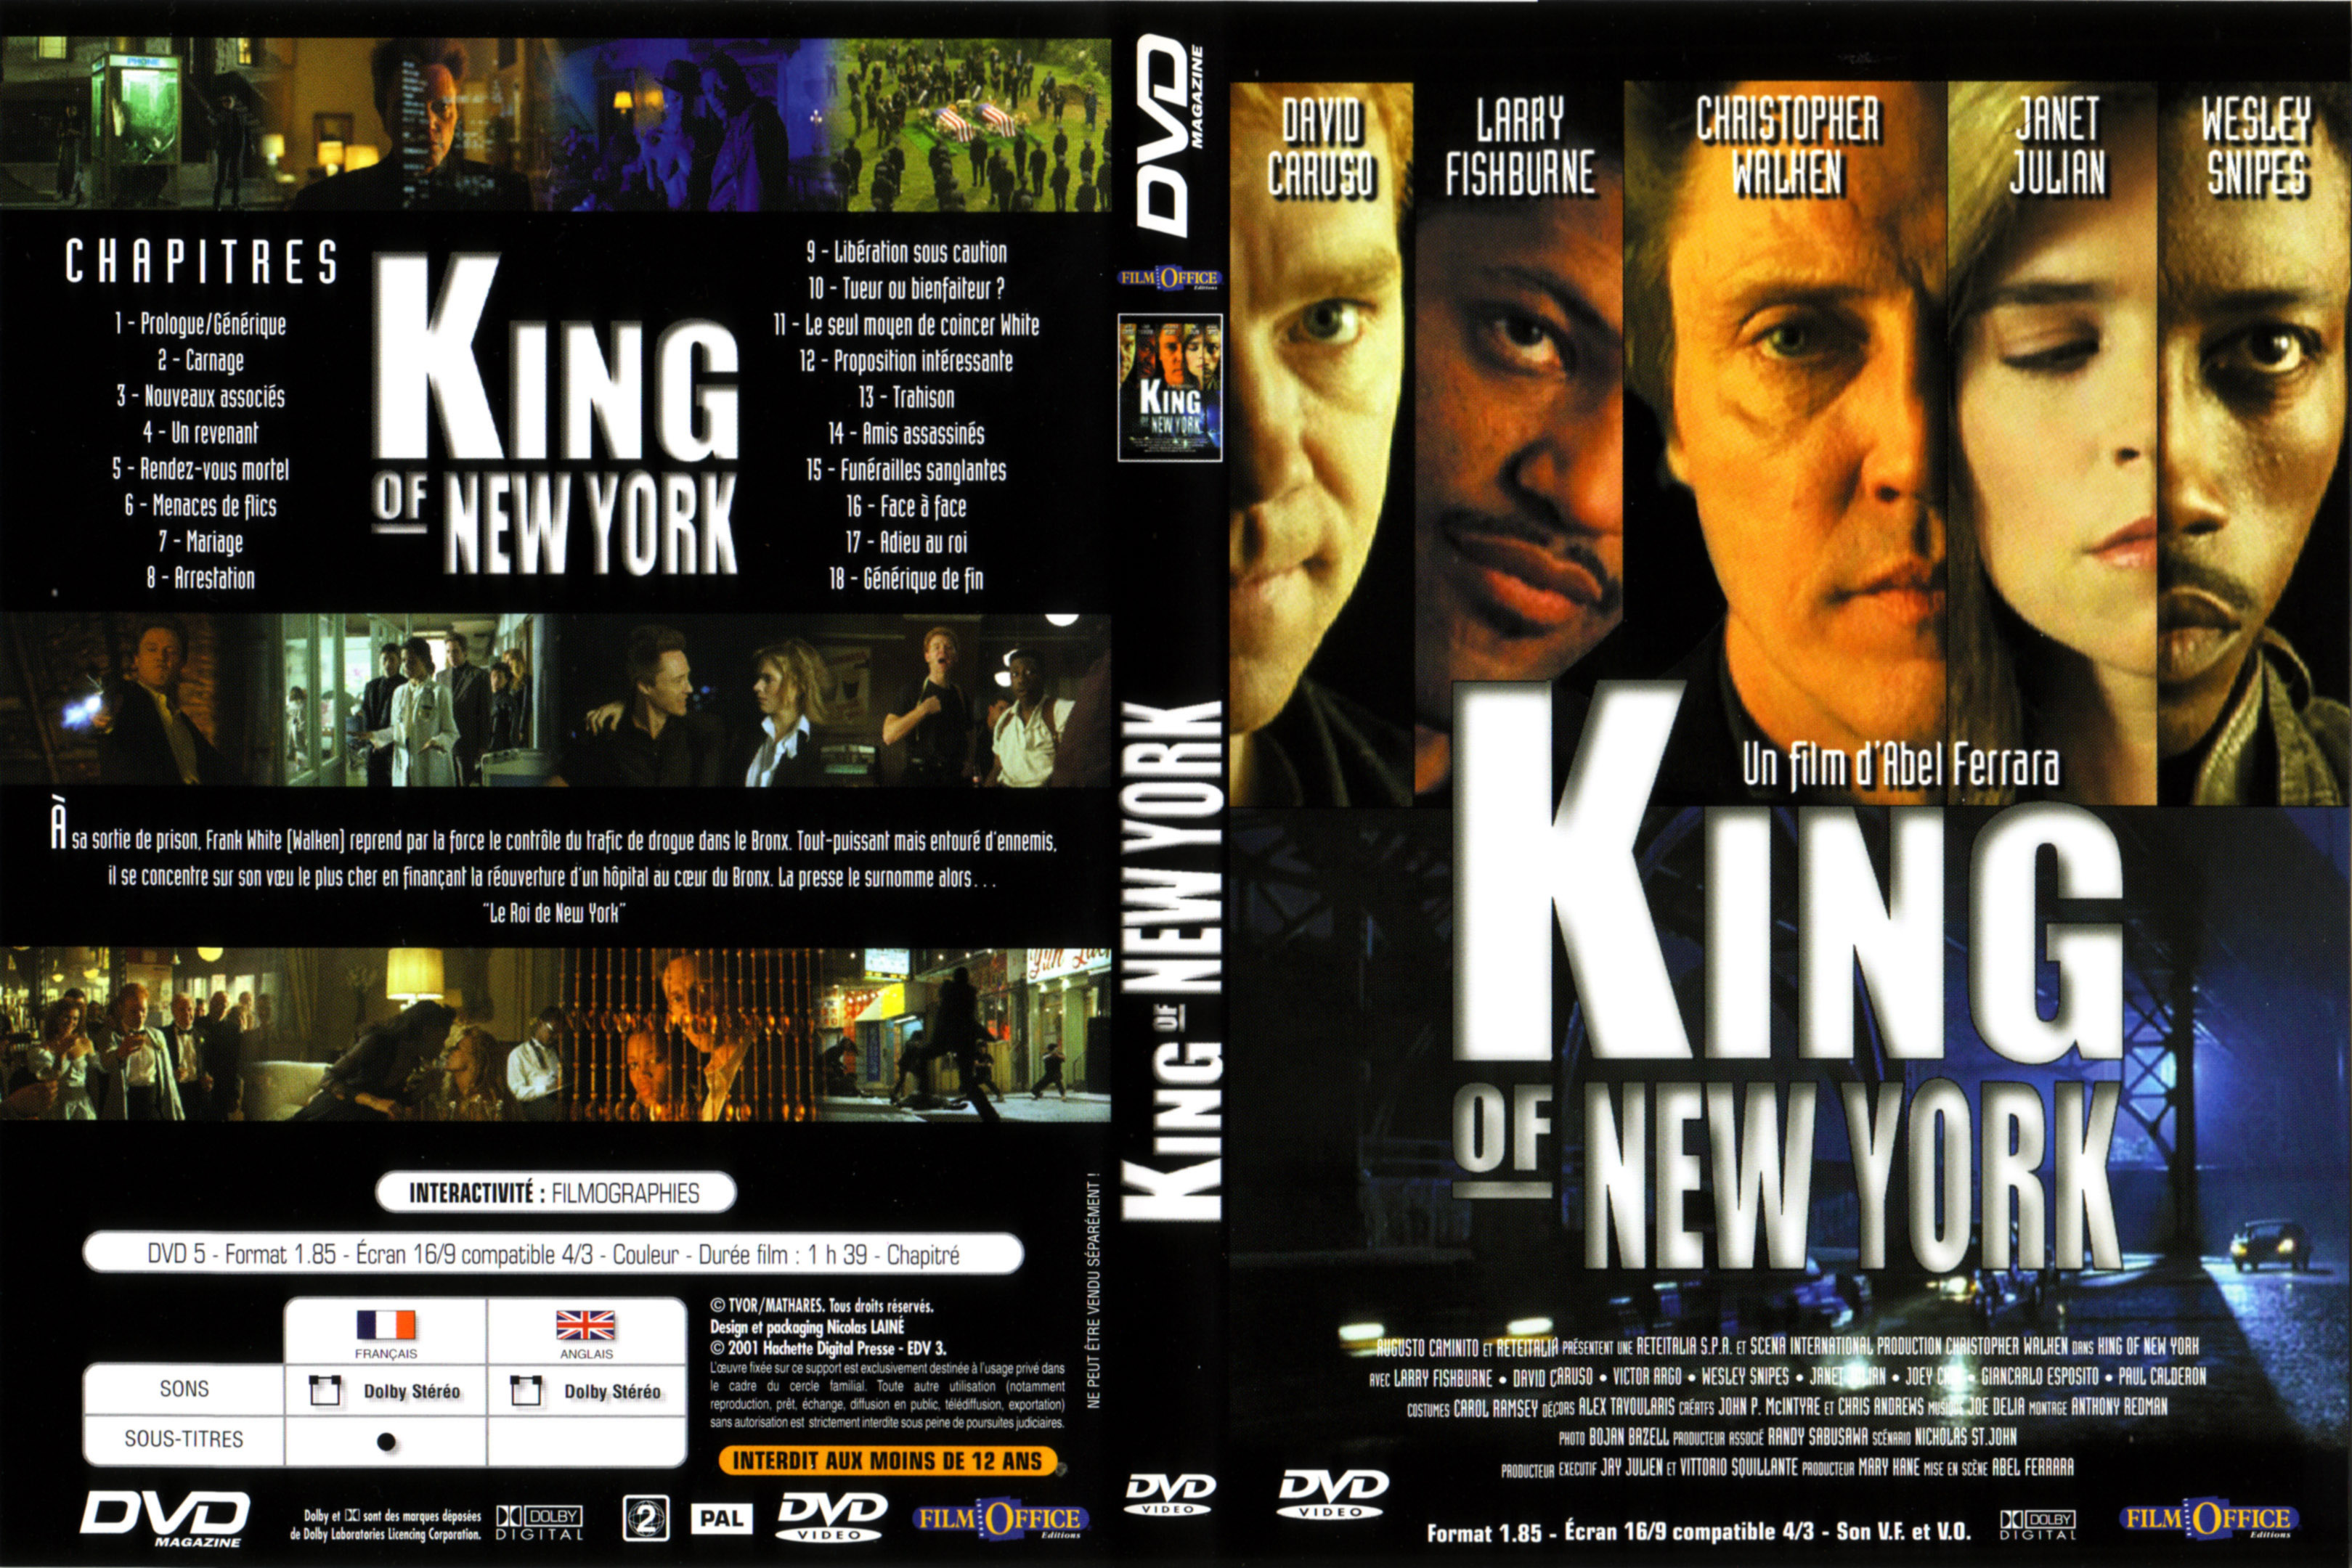 Jaquette DVD King of new york